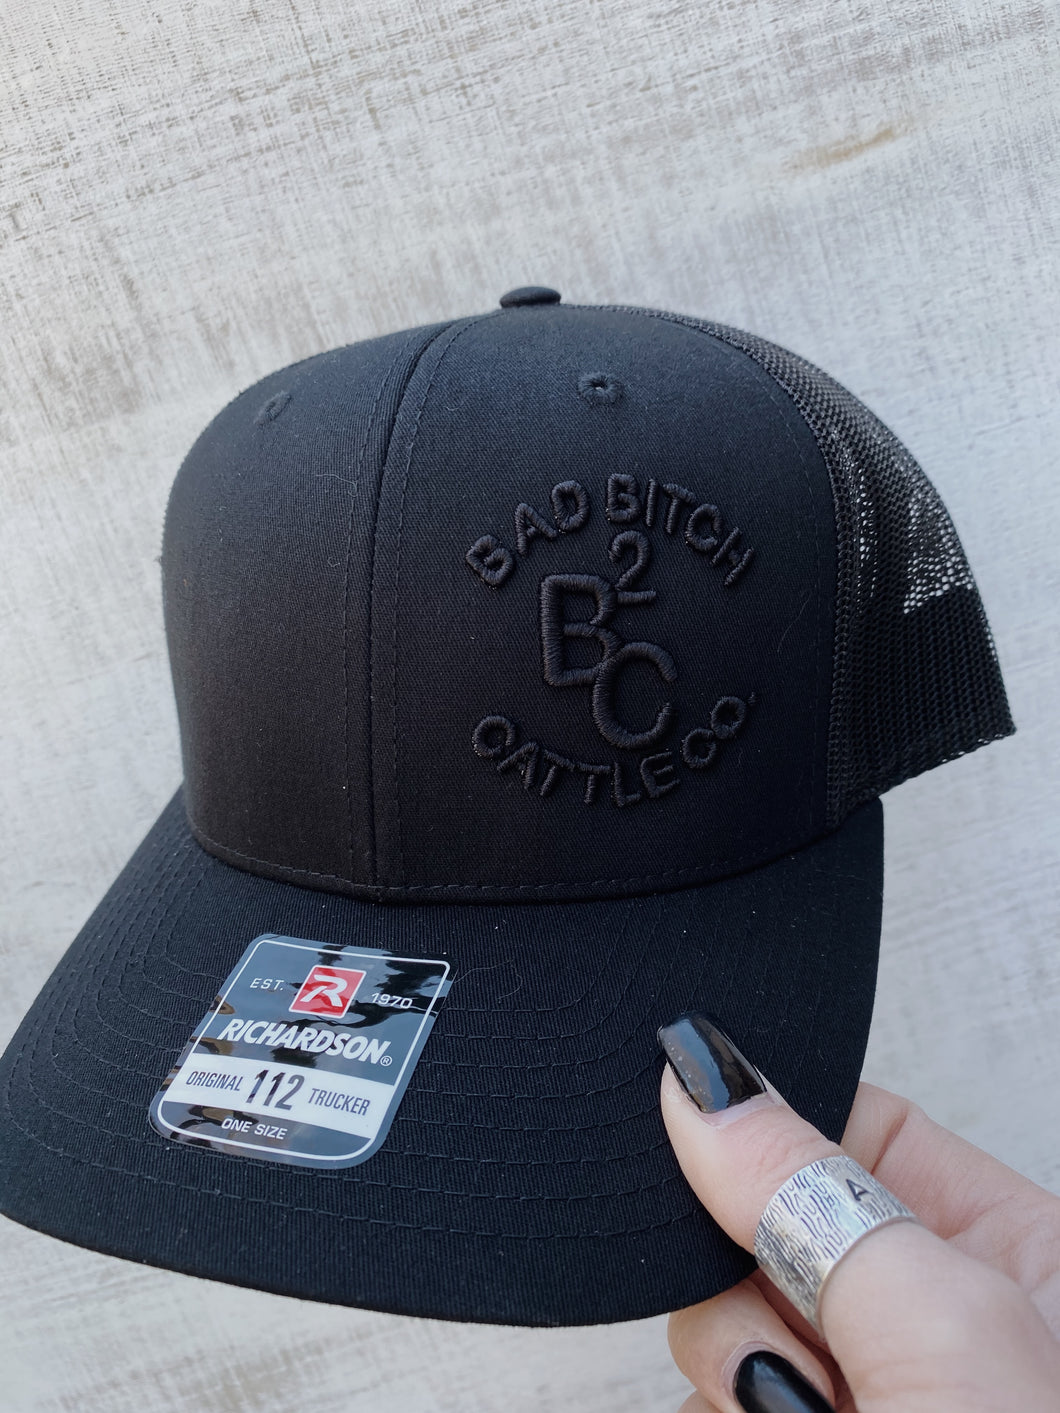 All Black Bad Bitch Cattle Co Hat